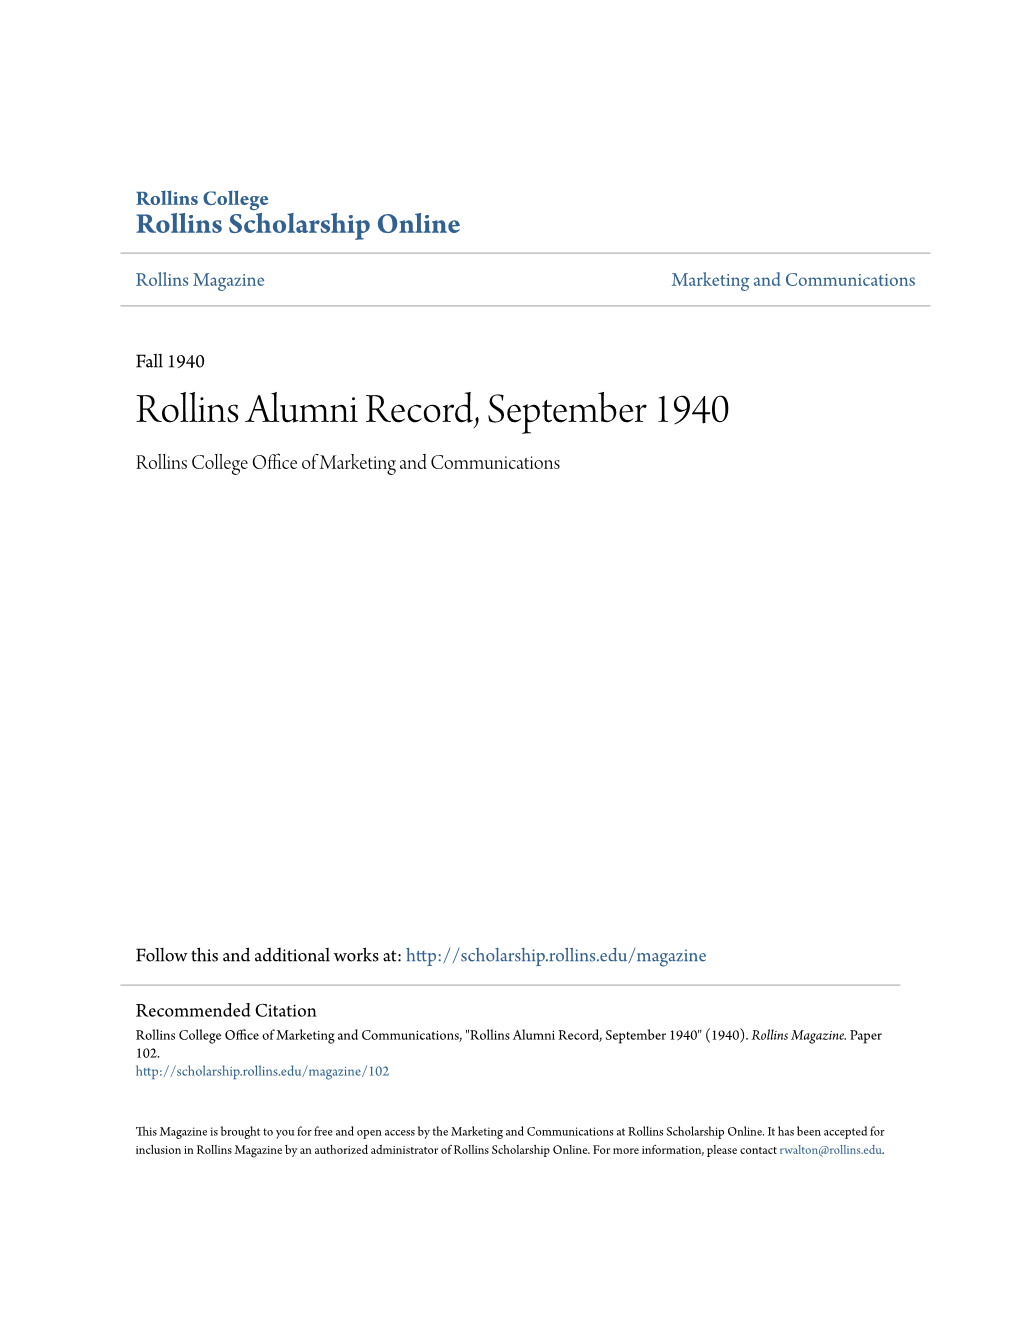 Rollins Alumni Record, September 1940 Rollins College Office Ofa M Rketing and Communications